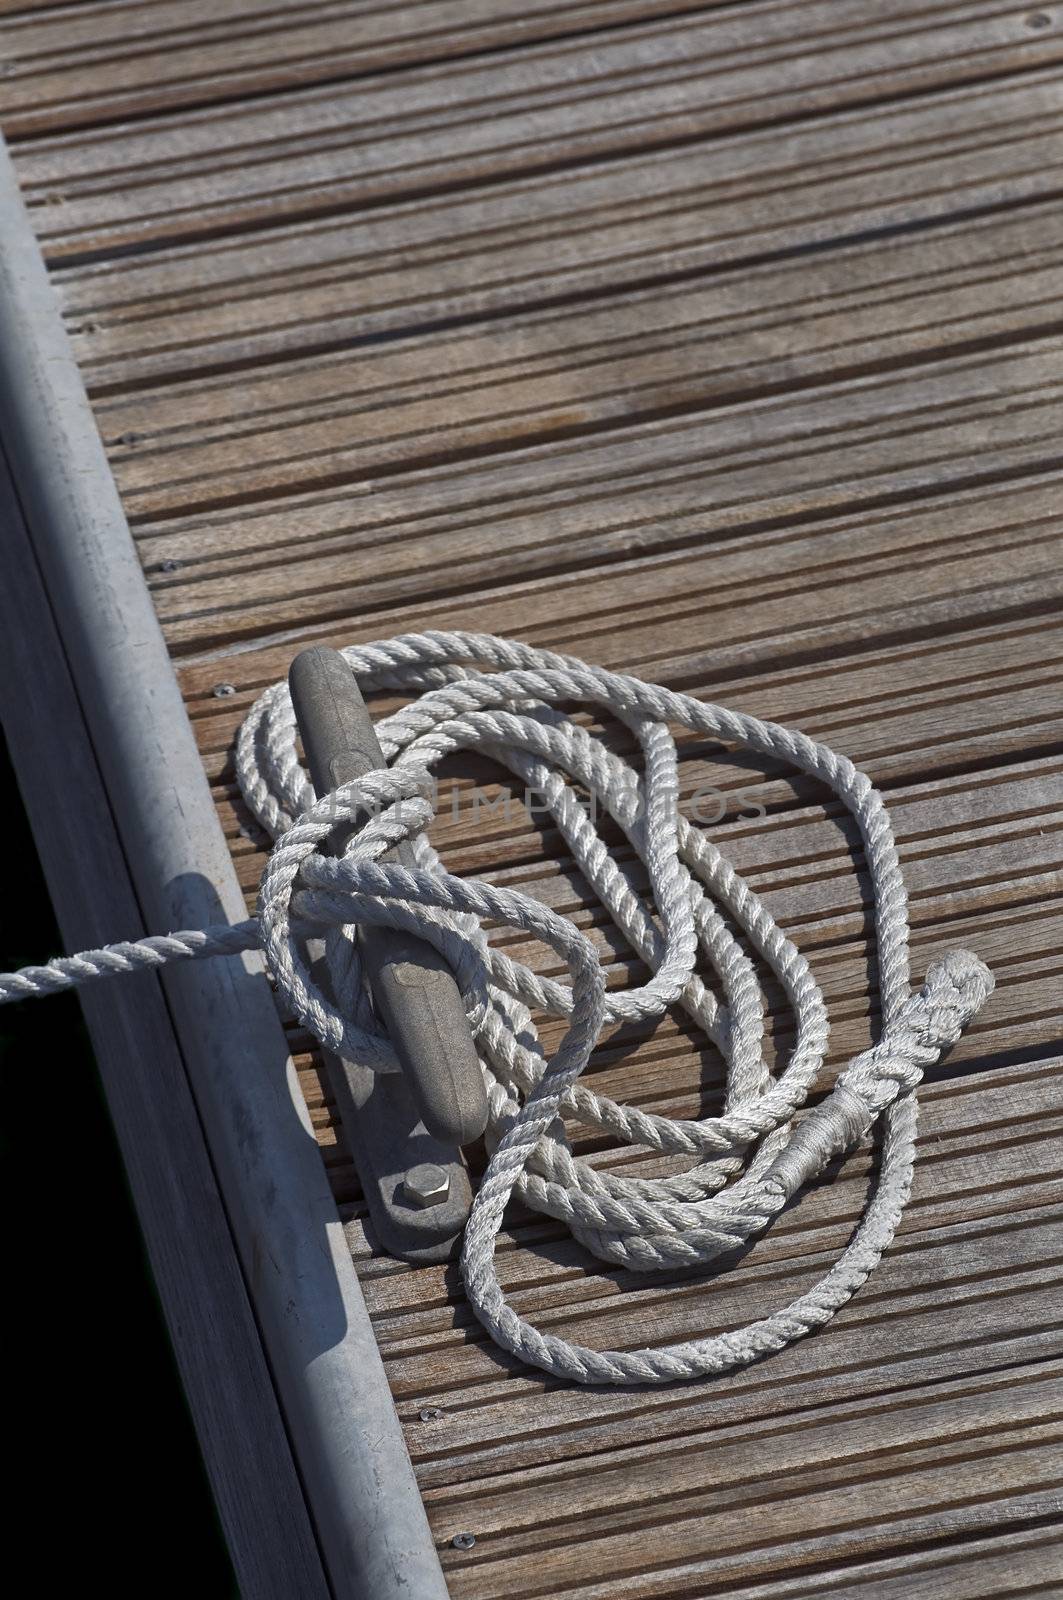 Tied up rope on a cleat of a pier